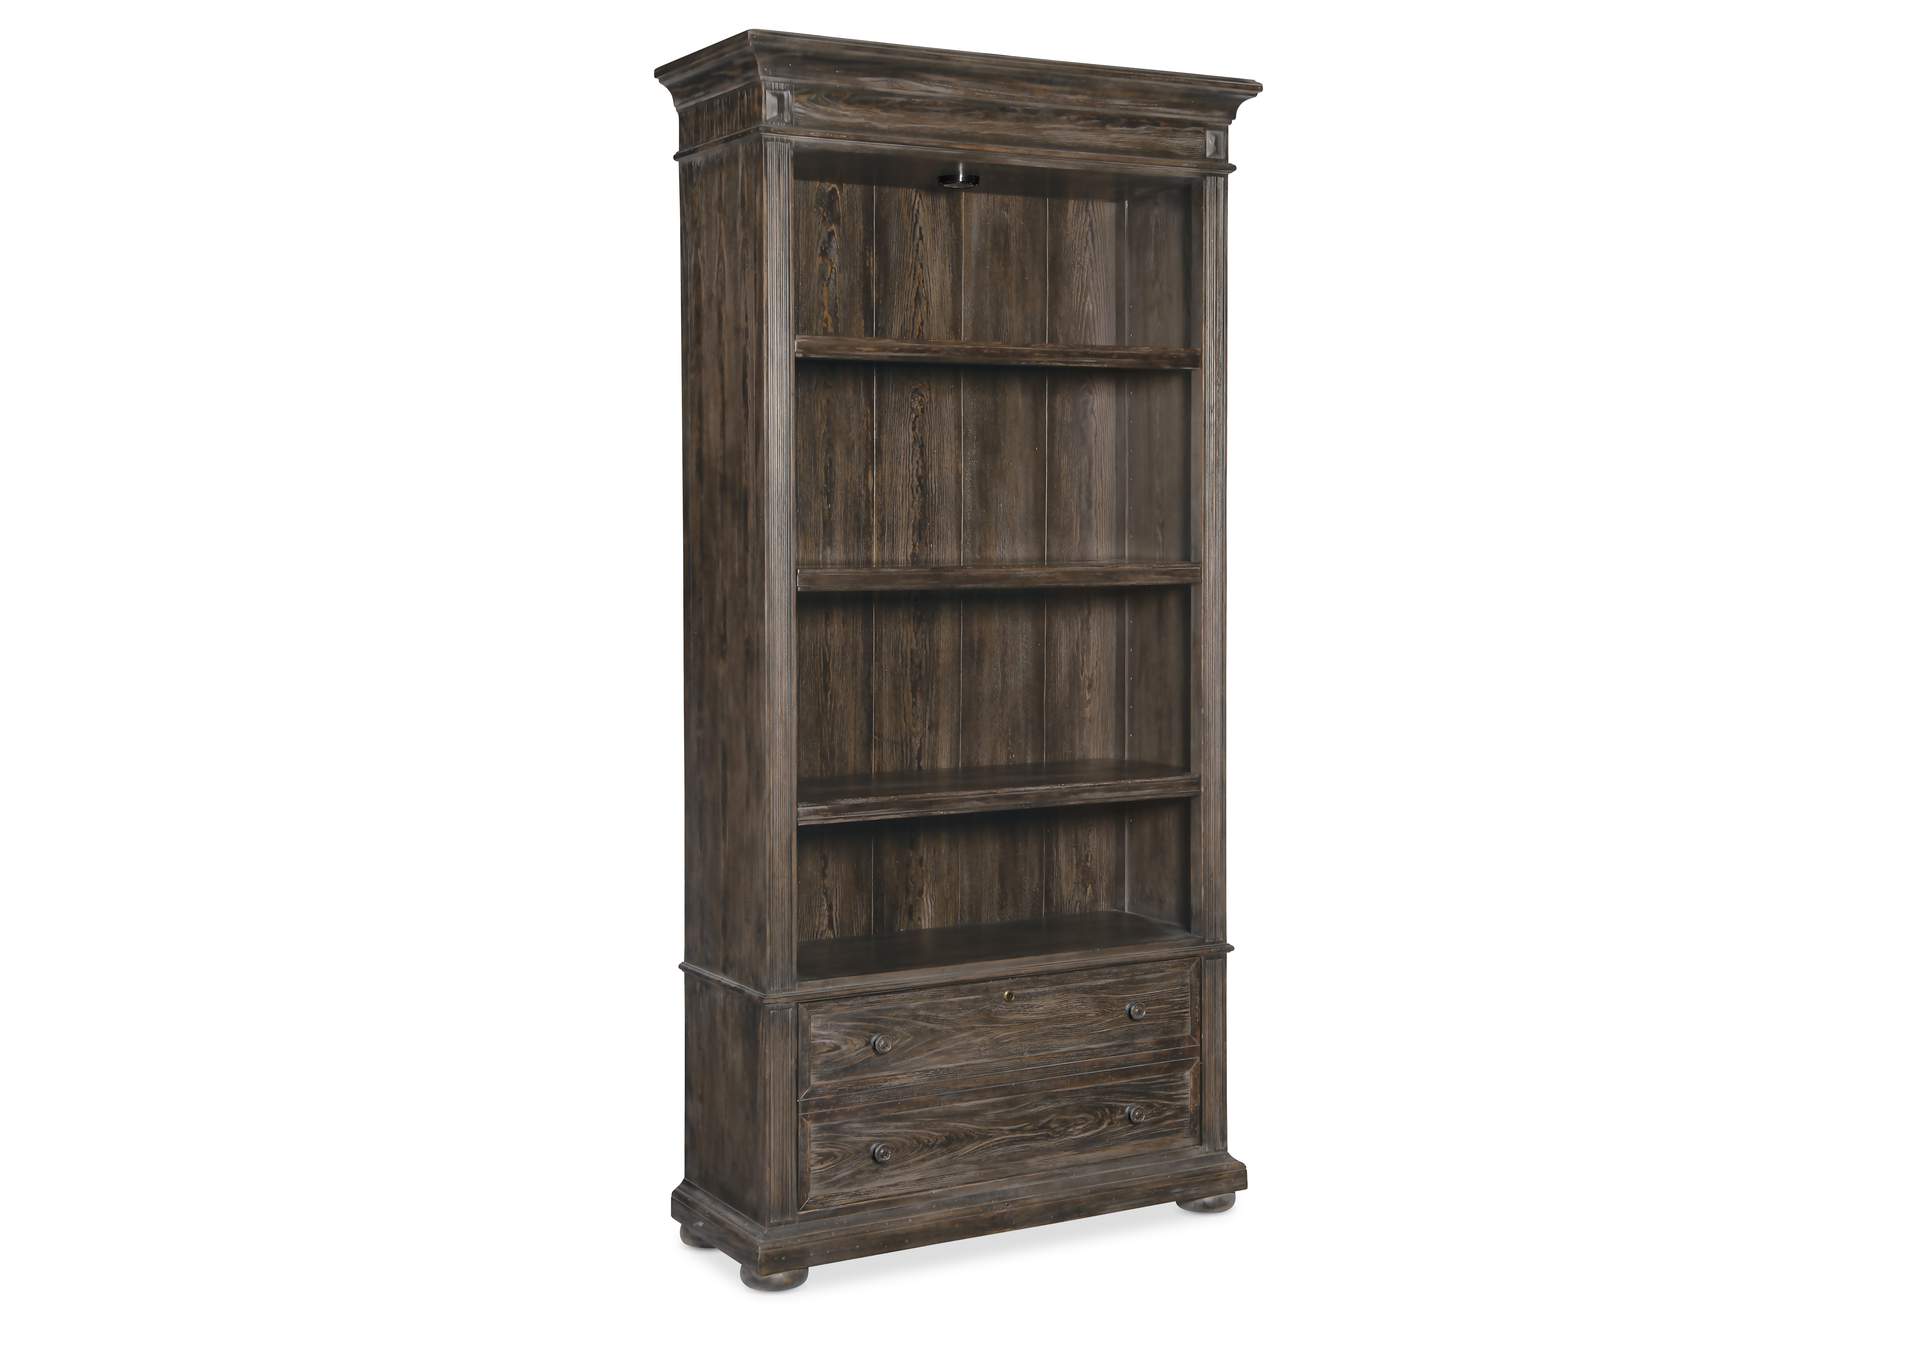 Traditions Bookcase,Hooker Furniture